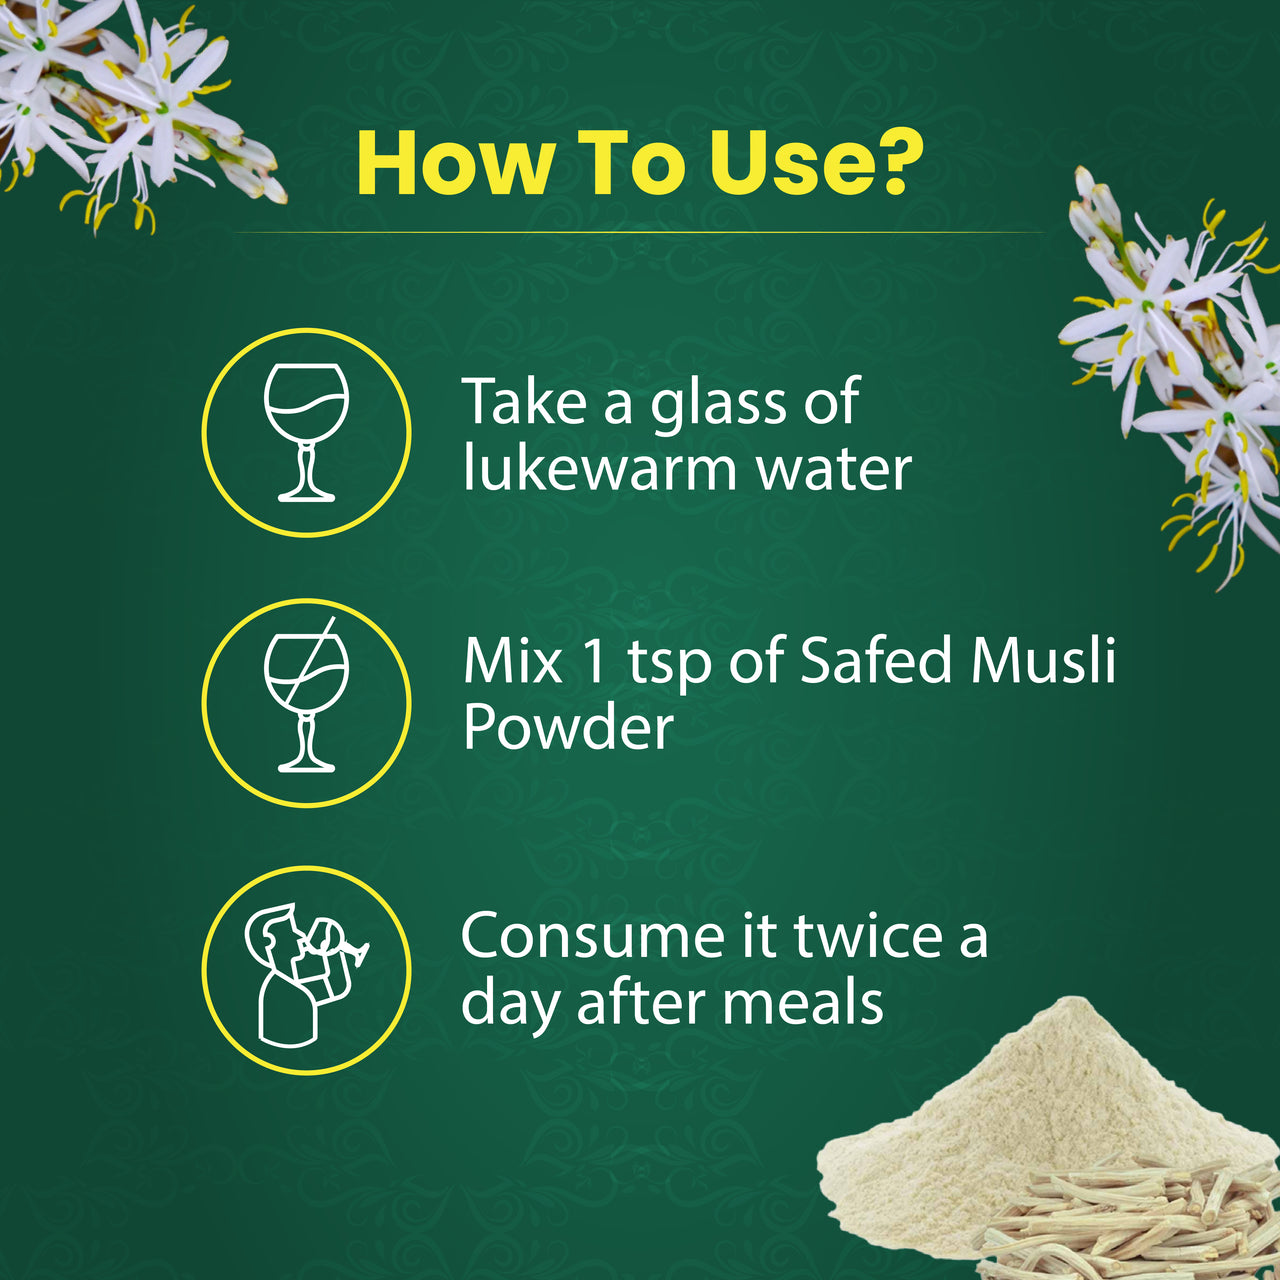 Can we take Safed musli with water?